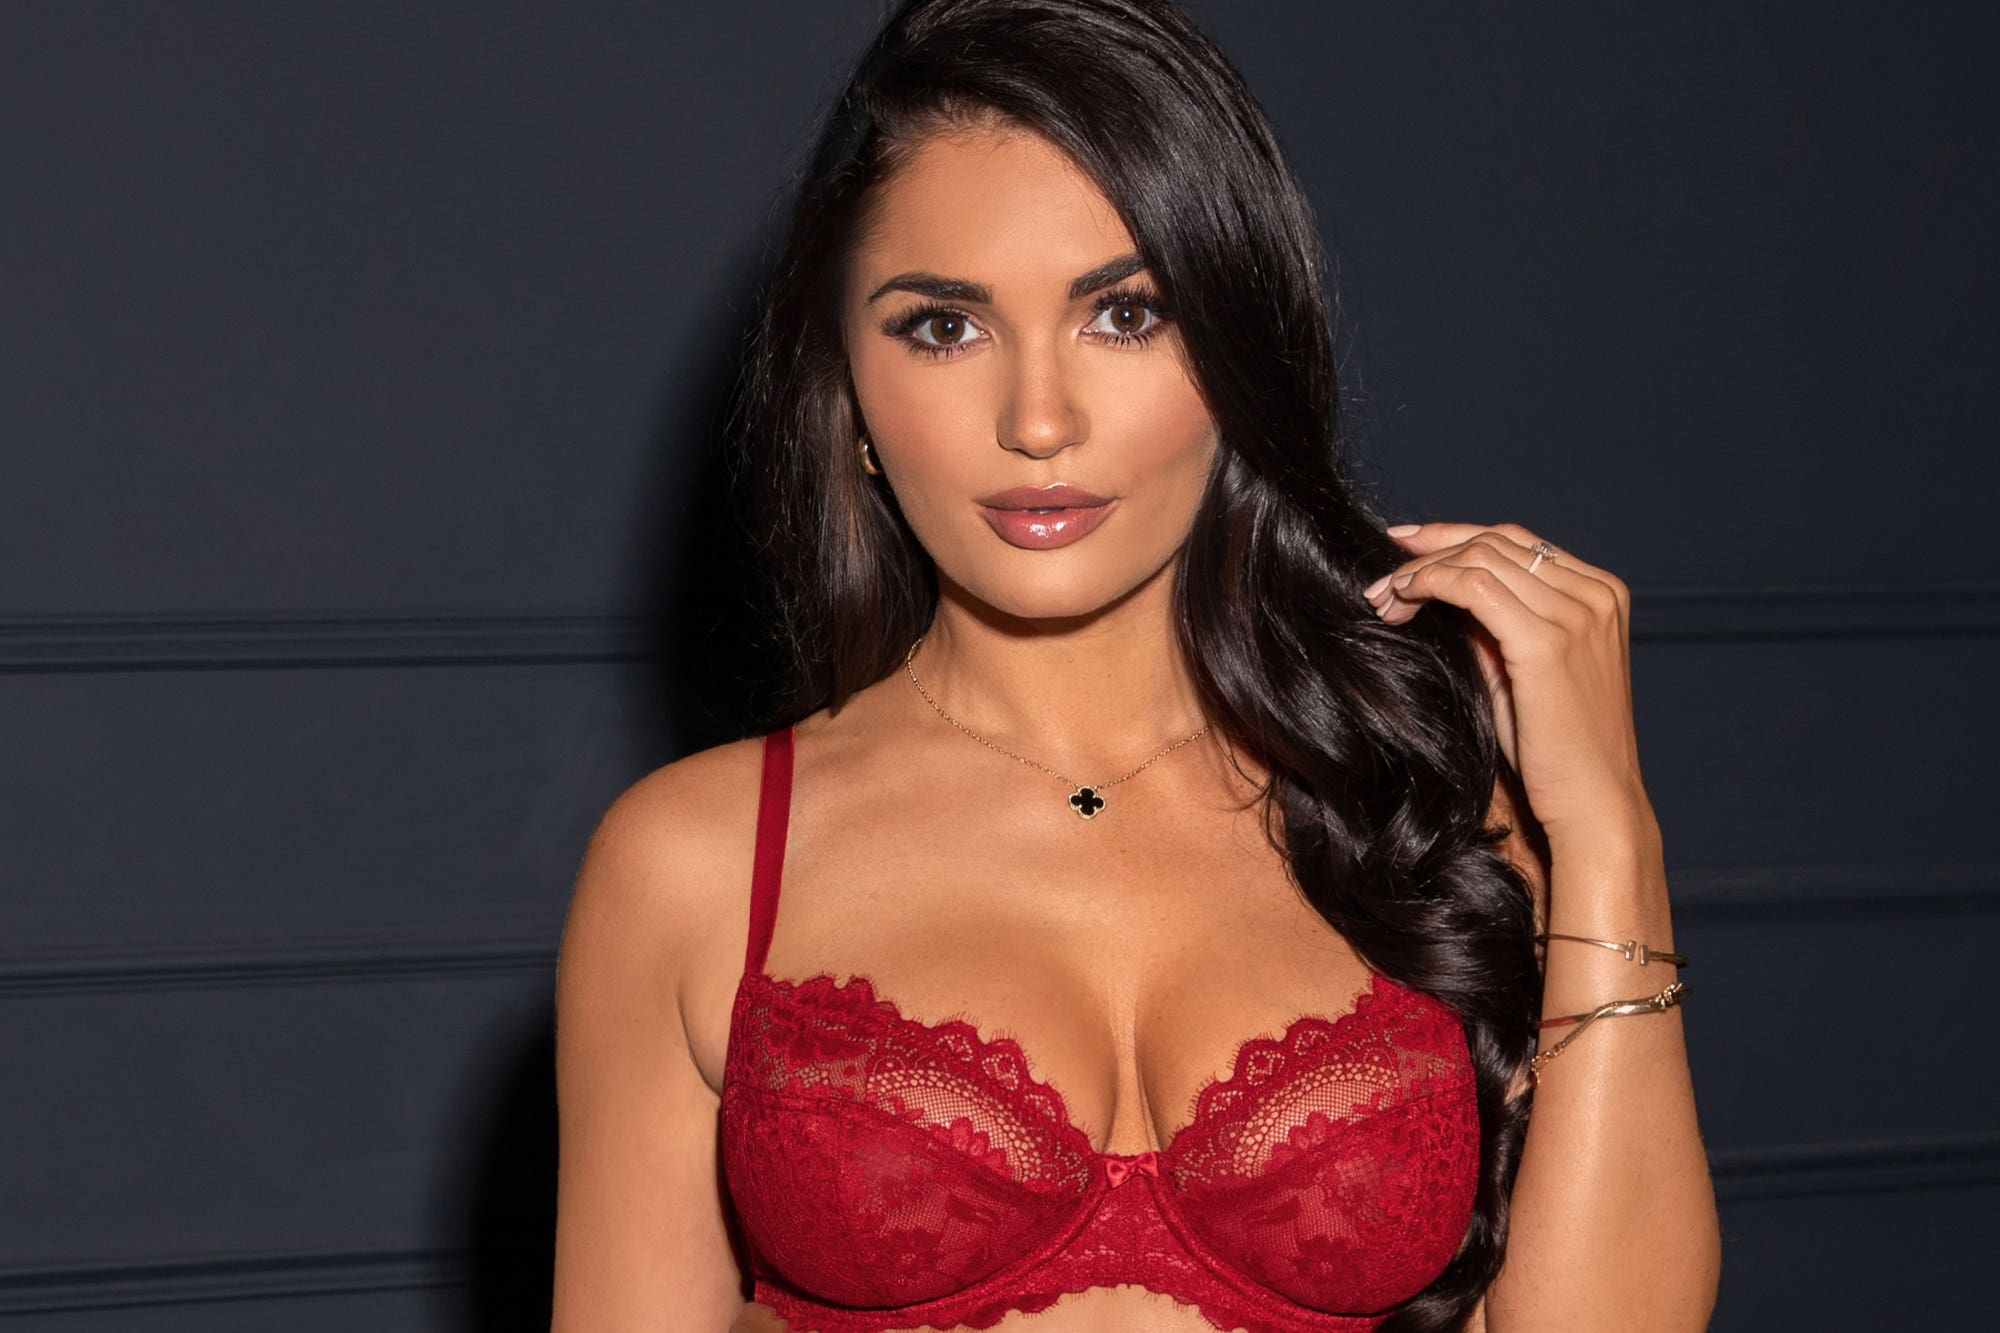 Former Love Island contestent and model India Reynolds shares her top lingerie tips (Pour Moi/PA)